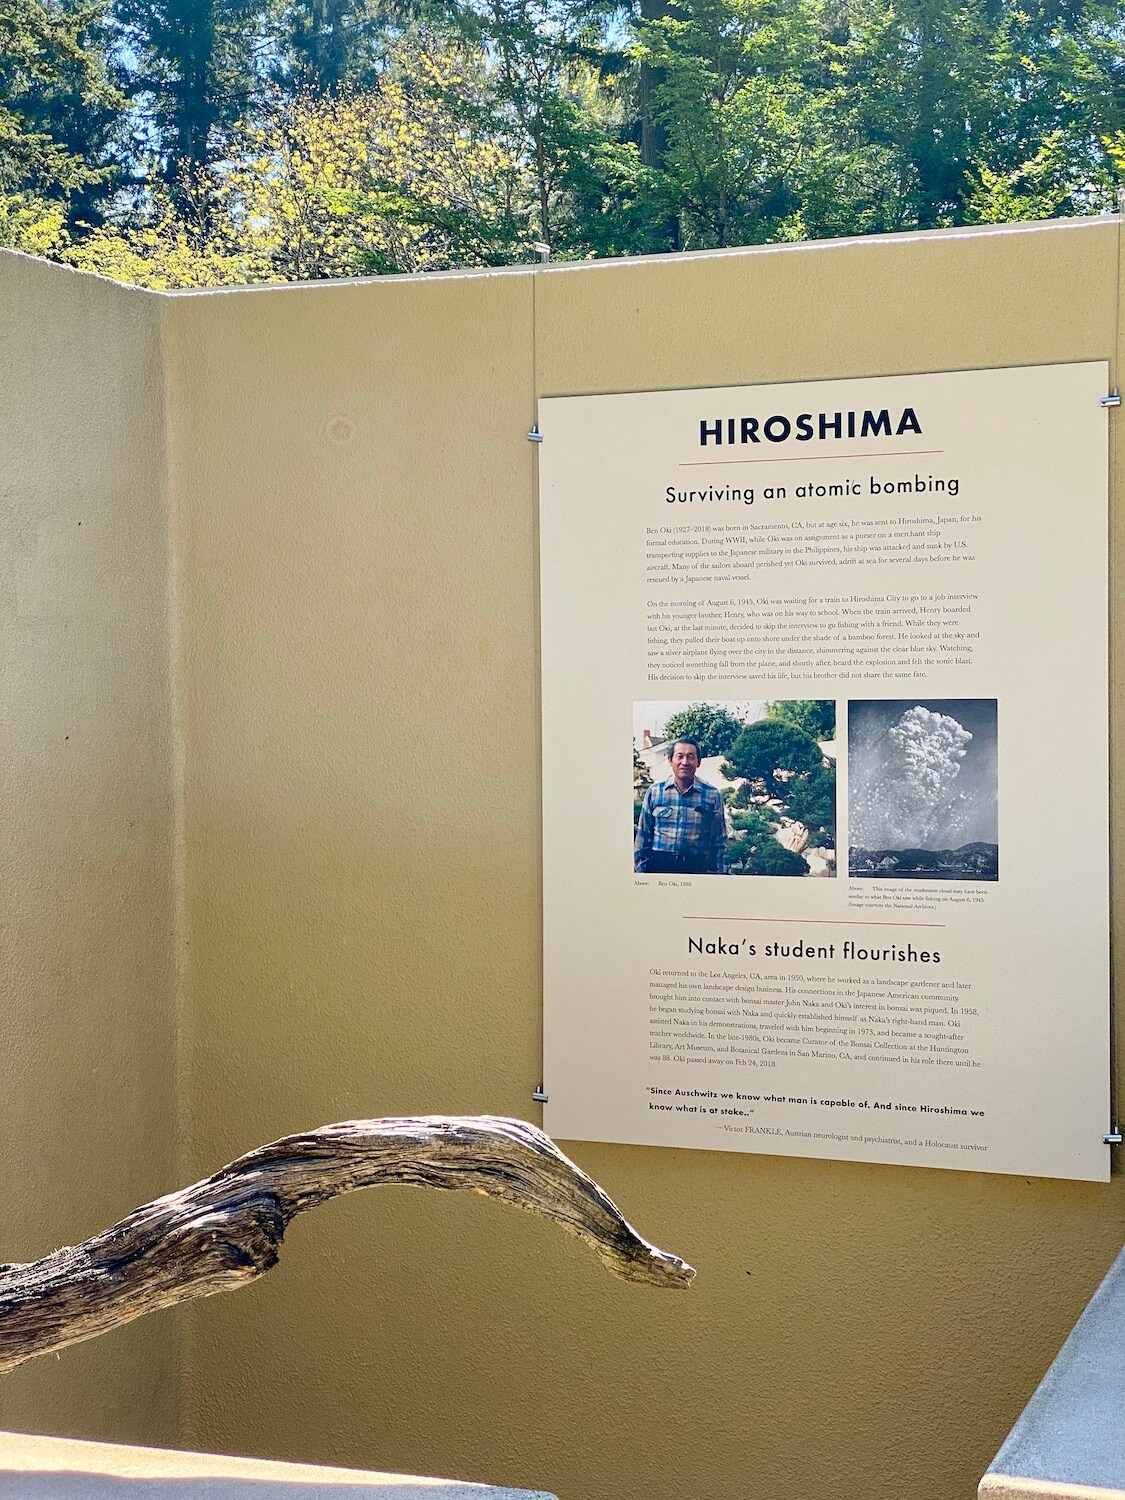 This placard at the Pacific Bonsai Museum, near Seattle, Washington, tells the story of a famous Bonsai Master who survived the US bombing of Hiroshima, Japan.  The beige color of the placard barely contrasts to the yellow stucco on the outdoor wall behind.  In the foreground a wave of charred wood brings home the intense content of the exhibit.  